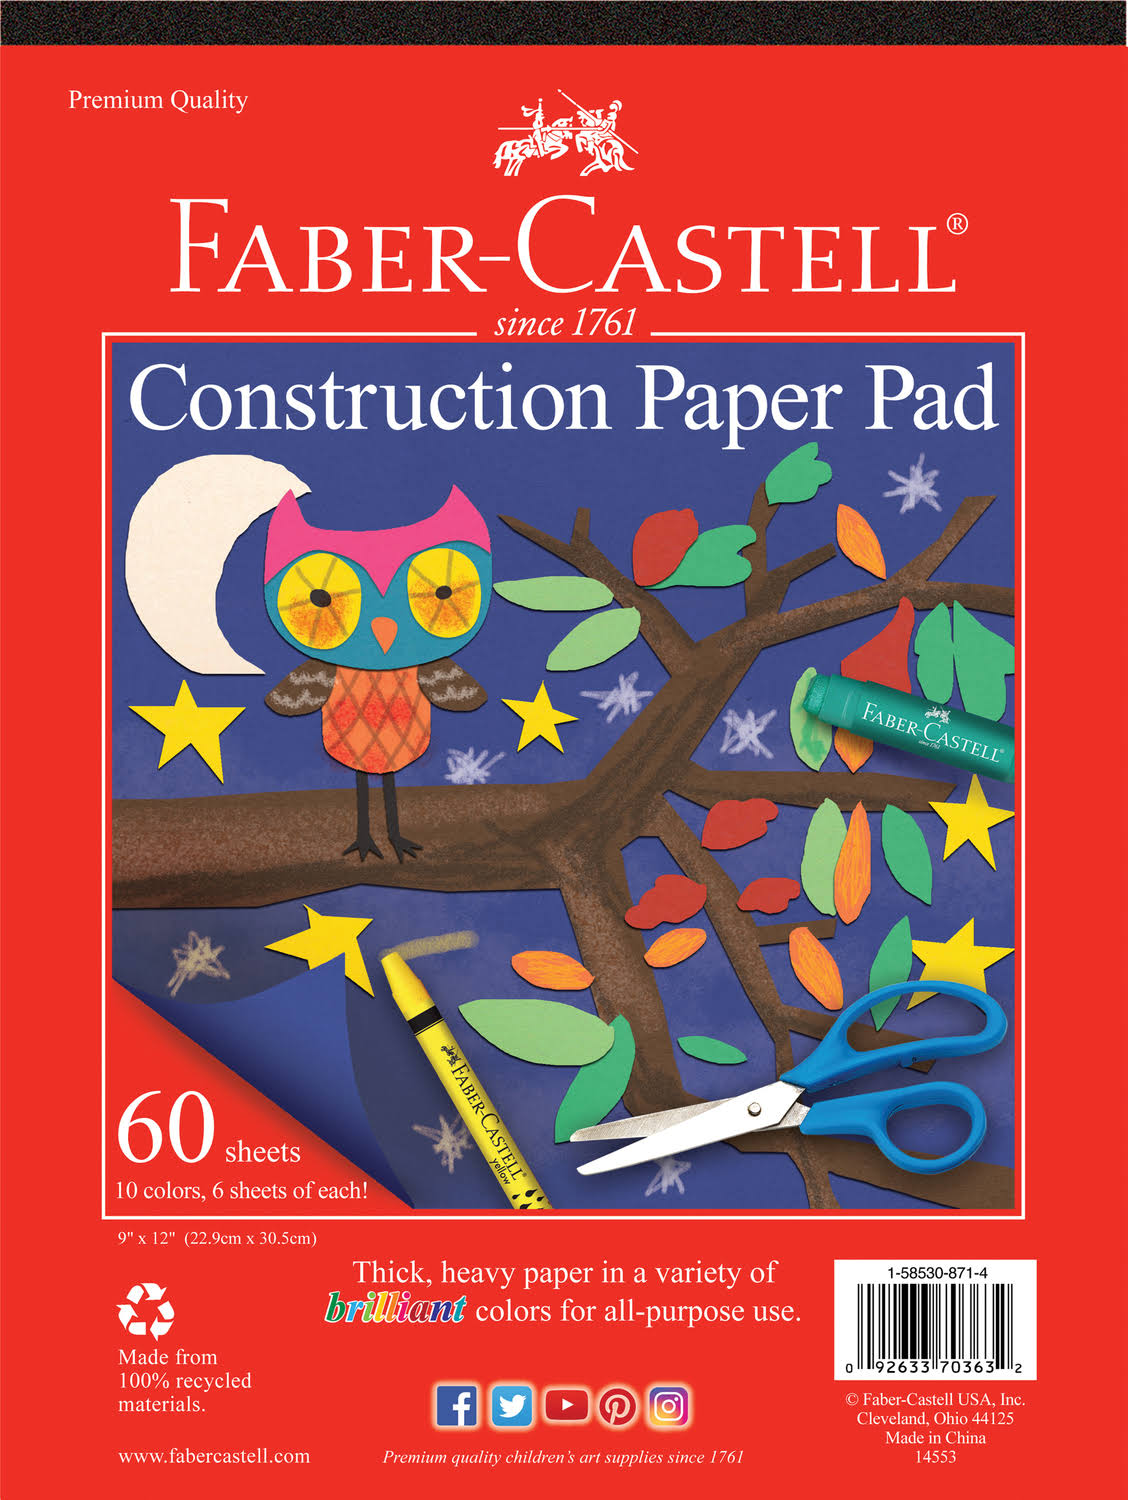 Faber-Castell Construction Paper Pad - 60 Sheet